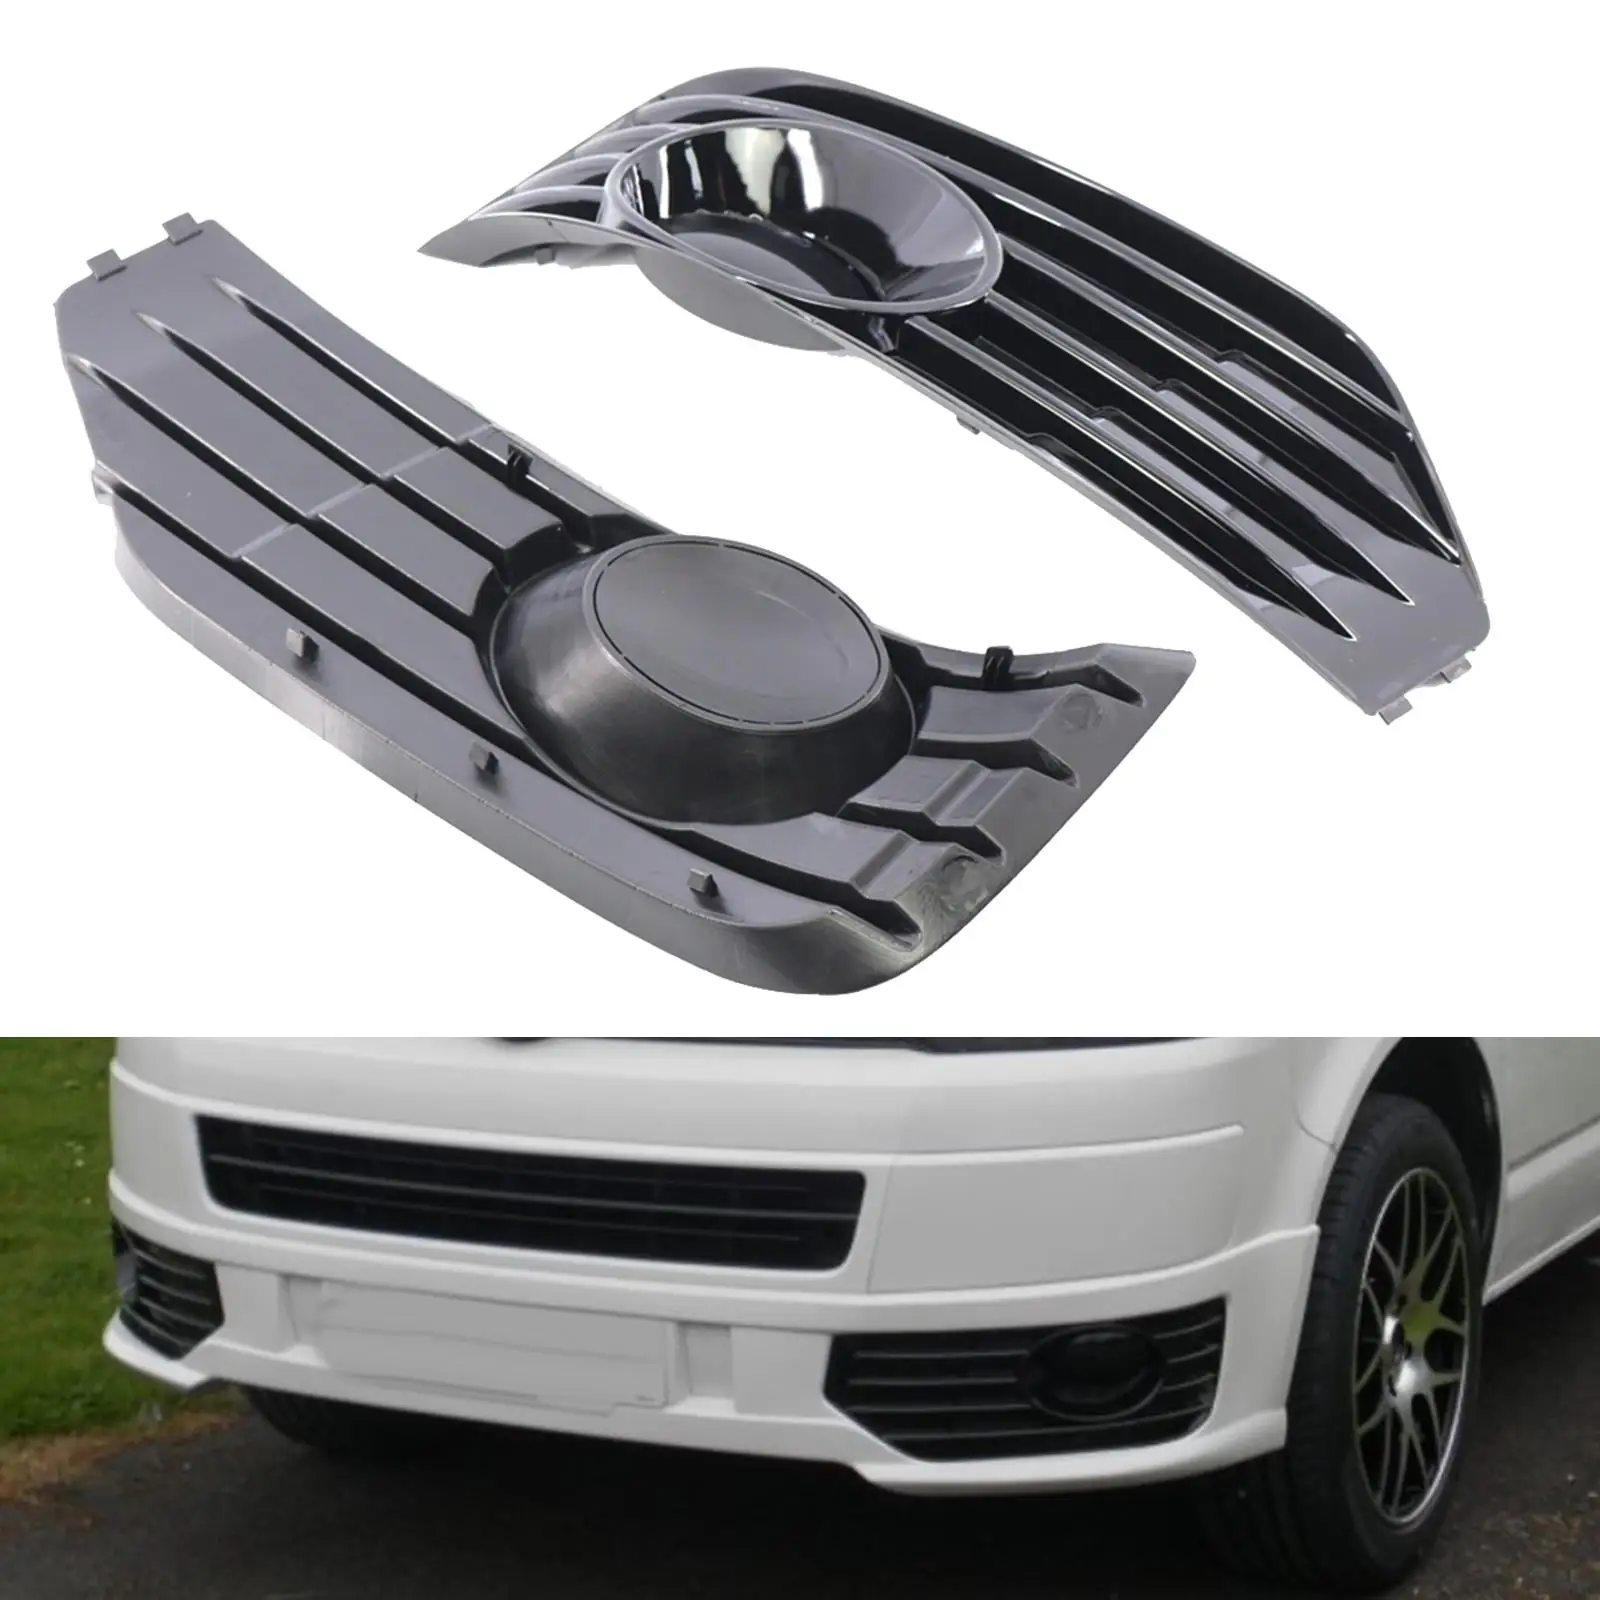 Fog Light Covers Easy to Install Exterior Trims Direct Replaces Mounting